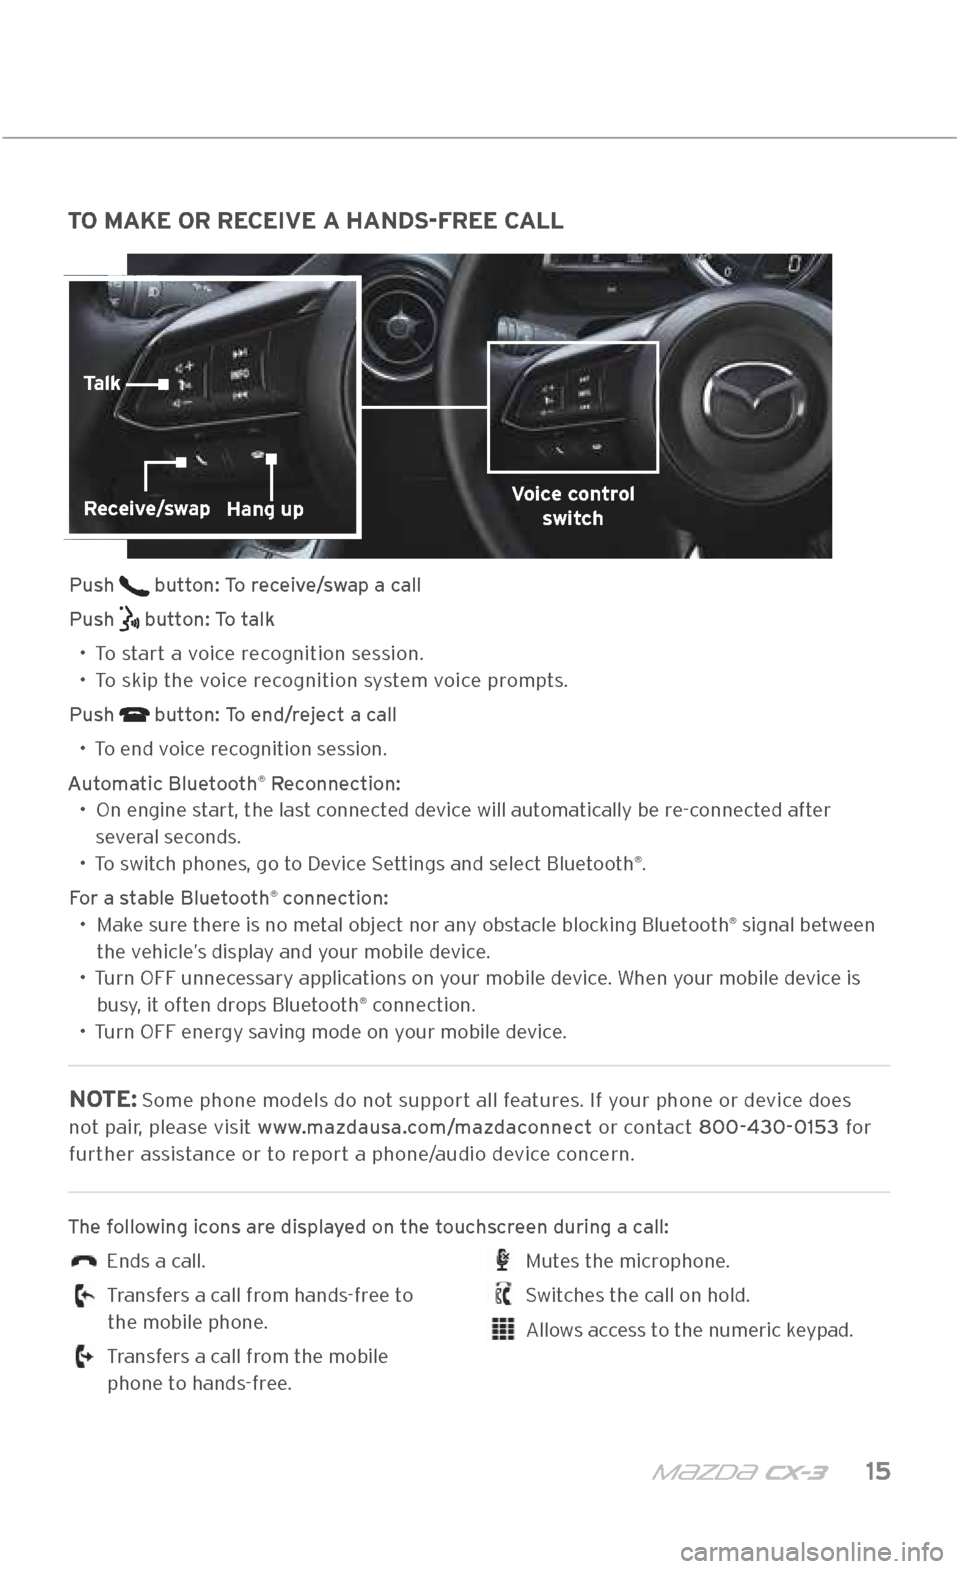 MAZDA MODEL CX-3 2018  Smart Start Guide (in English) m{zd{ c x-3    15
TO MAKE OR RECEIVE A HANDS-FREE CALL
Push  button: To receive/swap a call
Push 
 button: To talk
•   
To start a voice recognition session.
•   
To skip the voice recognition sys